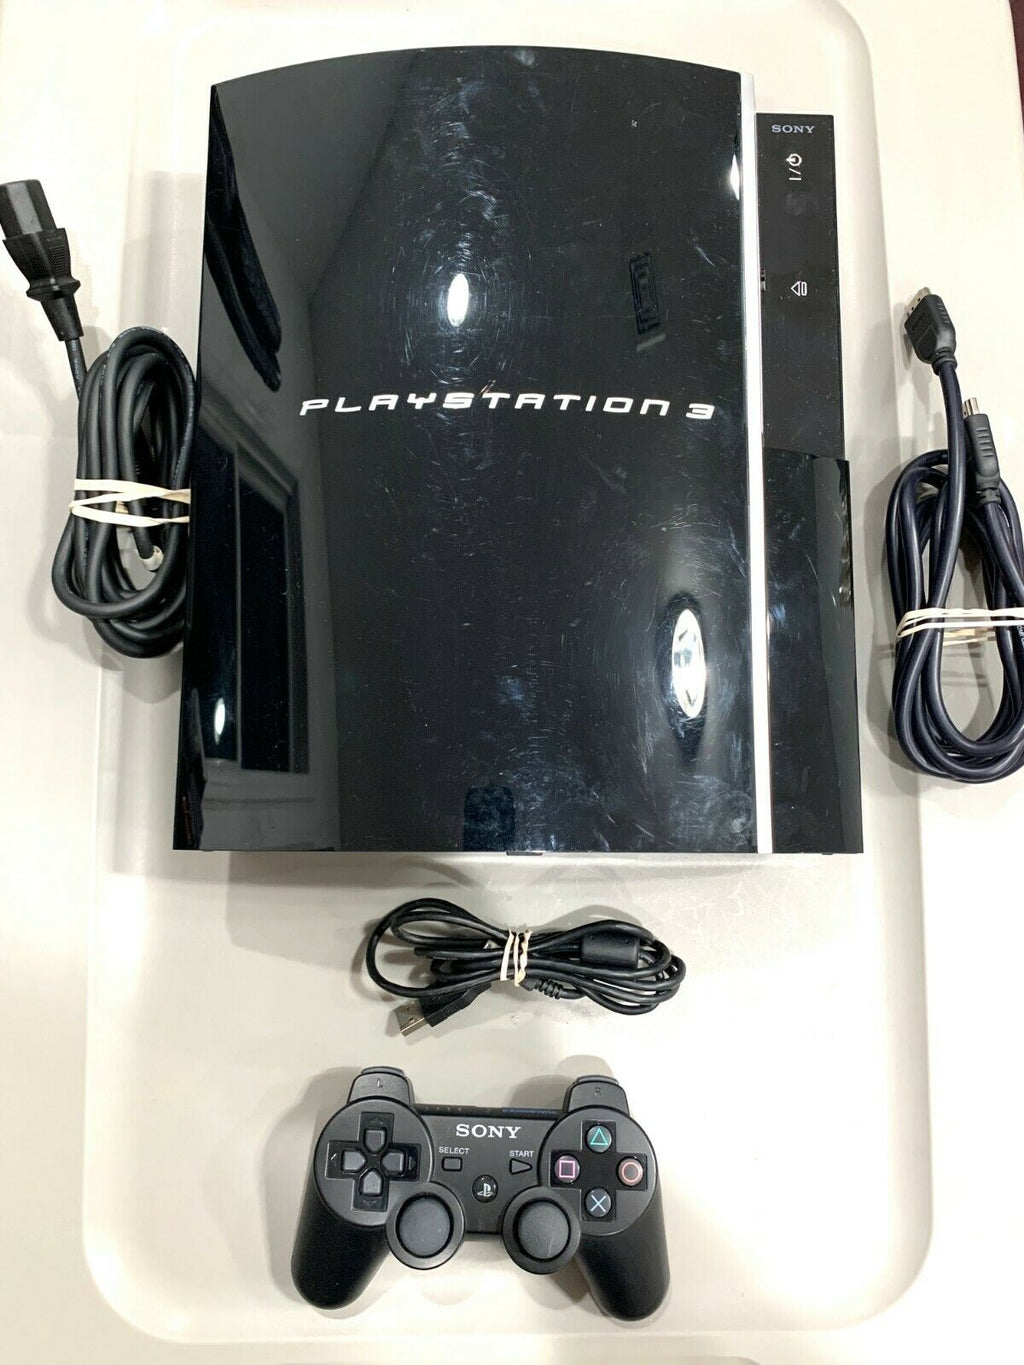 Sony Playstation 3 PS3 Console CECHL01 PS1 BACKWARDS COMPAT – The Island